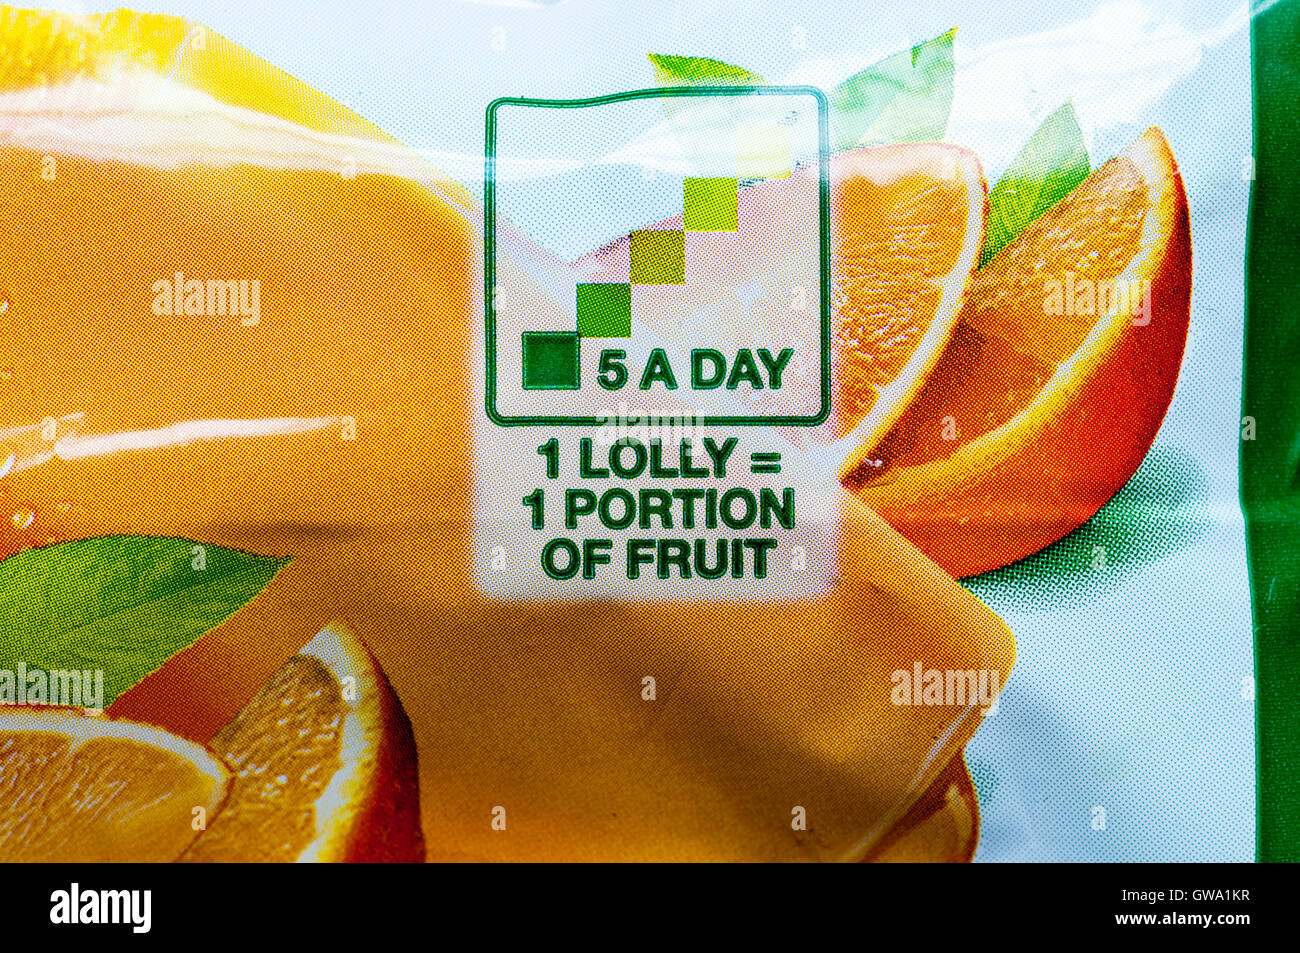 Wrapper of a Del Monte orange lolly says that 1 lolly equals 1 portion of fruit and is one of your 5 a day. Stock Photo